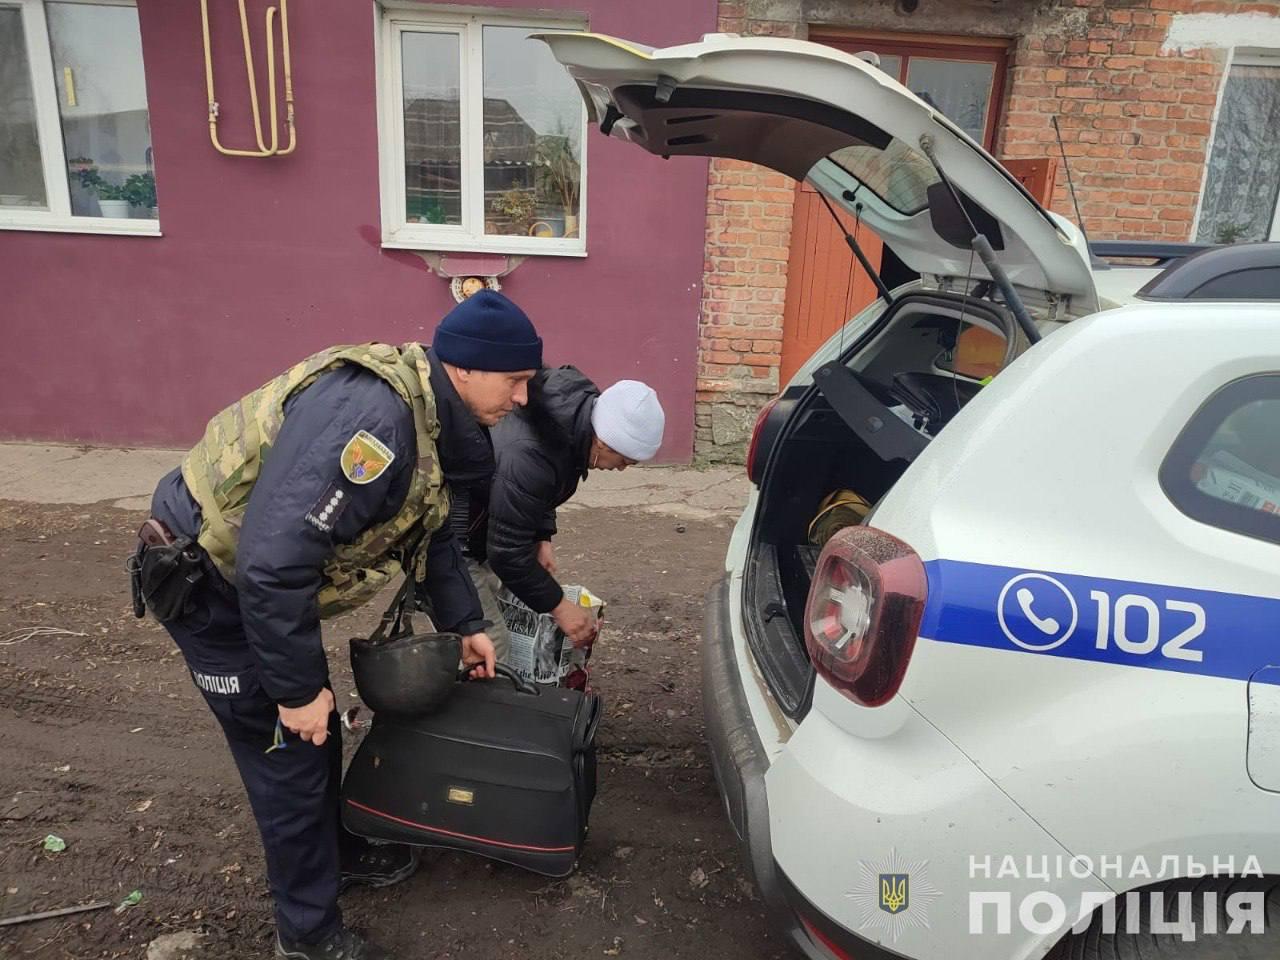 No panic in Sumy, though tension is felt — journalist